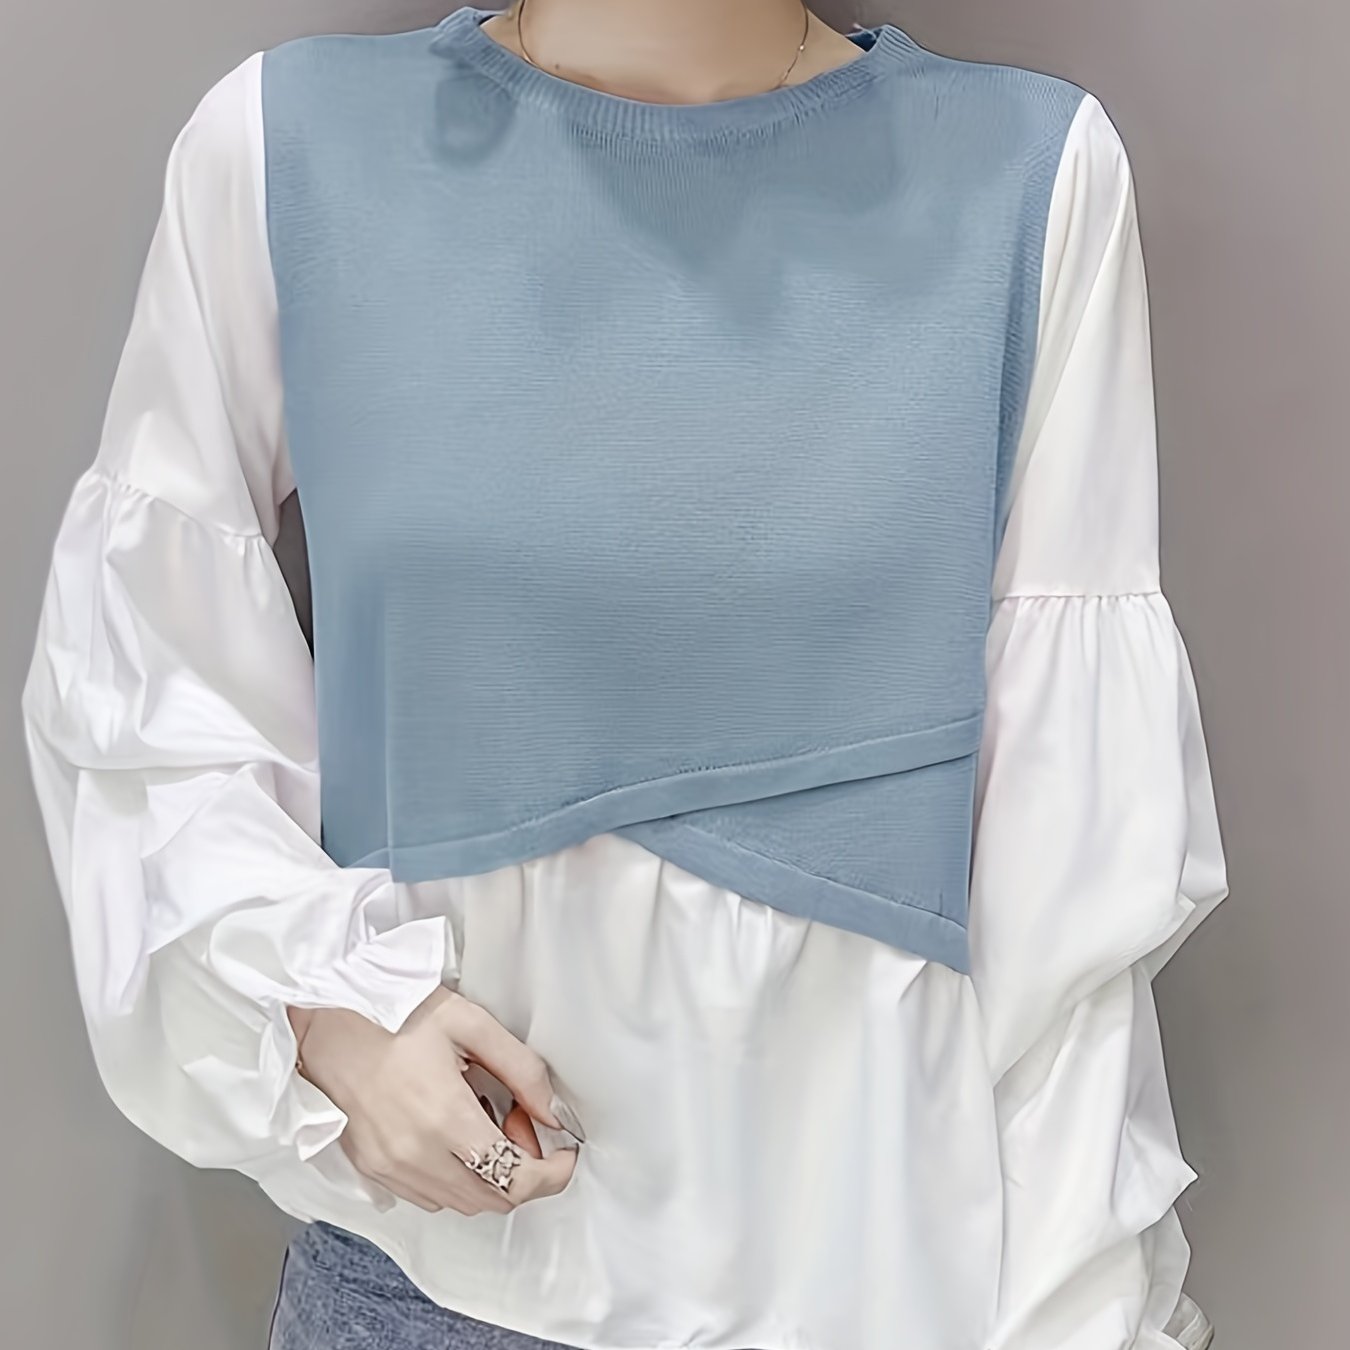 Antmvs Stitching Puff Sleeve Knitted Top, Elegant Crew Neck Long Sleeve Top, Women's Clothing